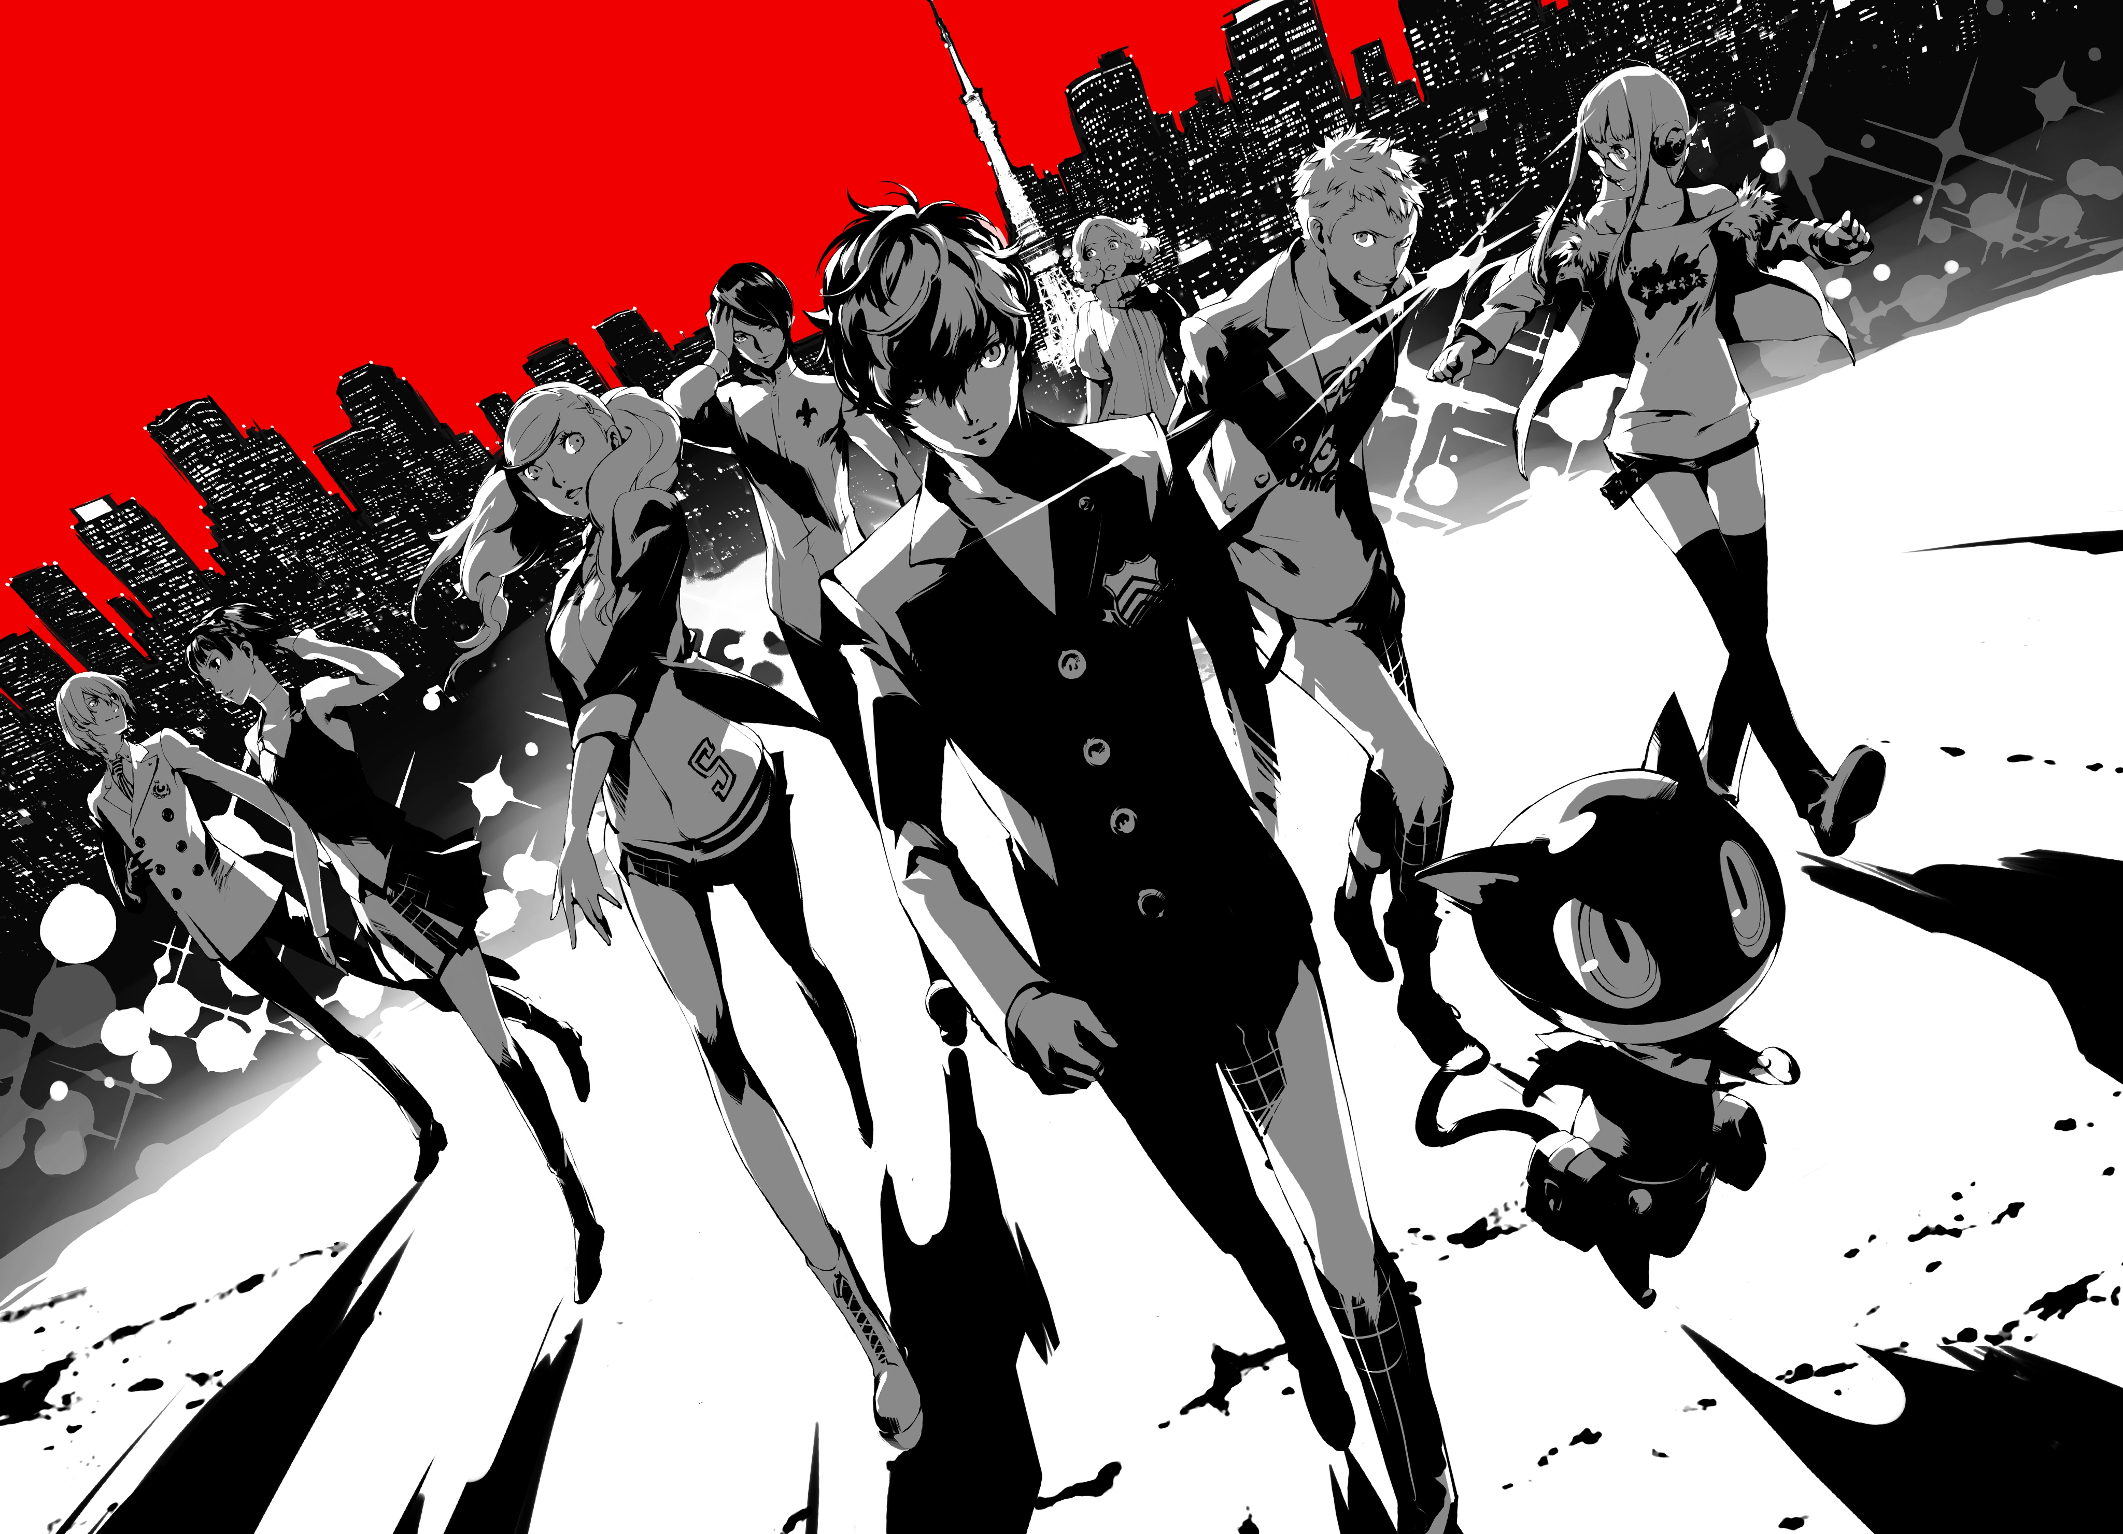 What's Your Favorite Persona 5 OST? - Persona 5 - Fanpop